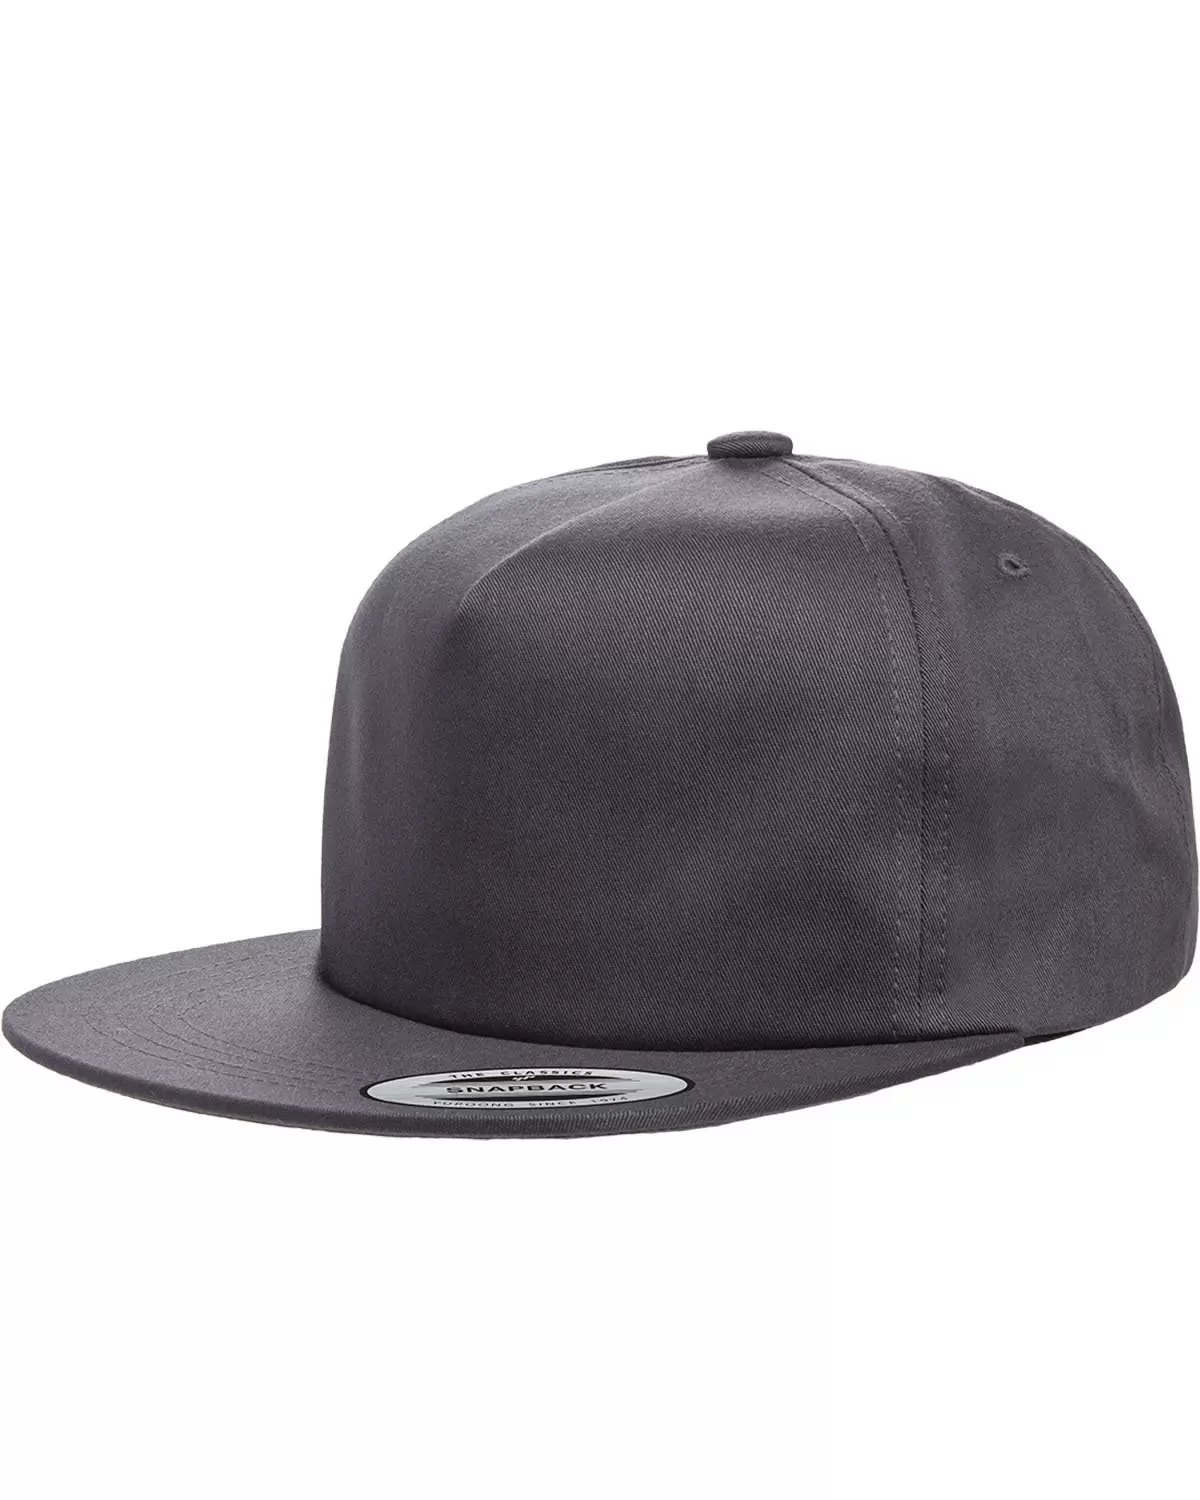 Yupoong-Flex Five-Panel - 6502 Fit Cap From Snapback Unstructured